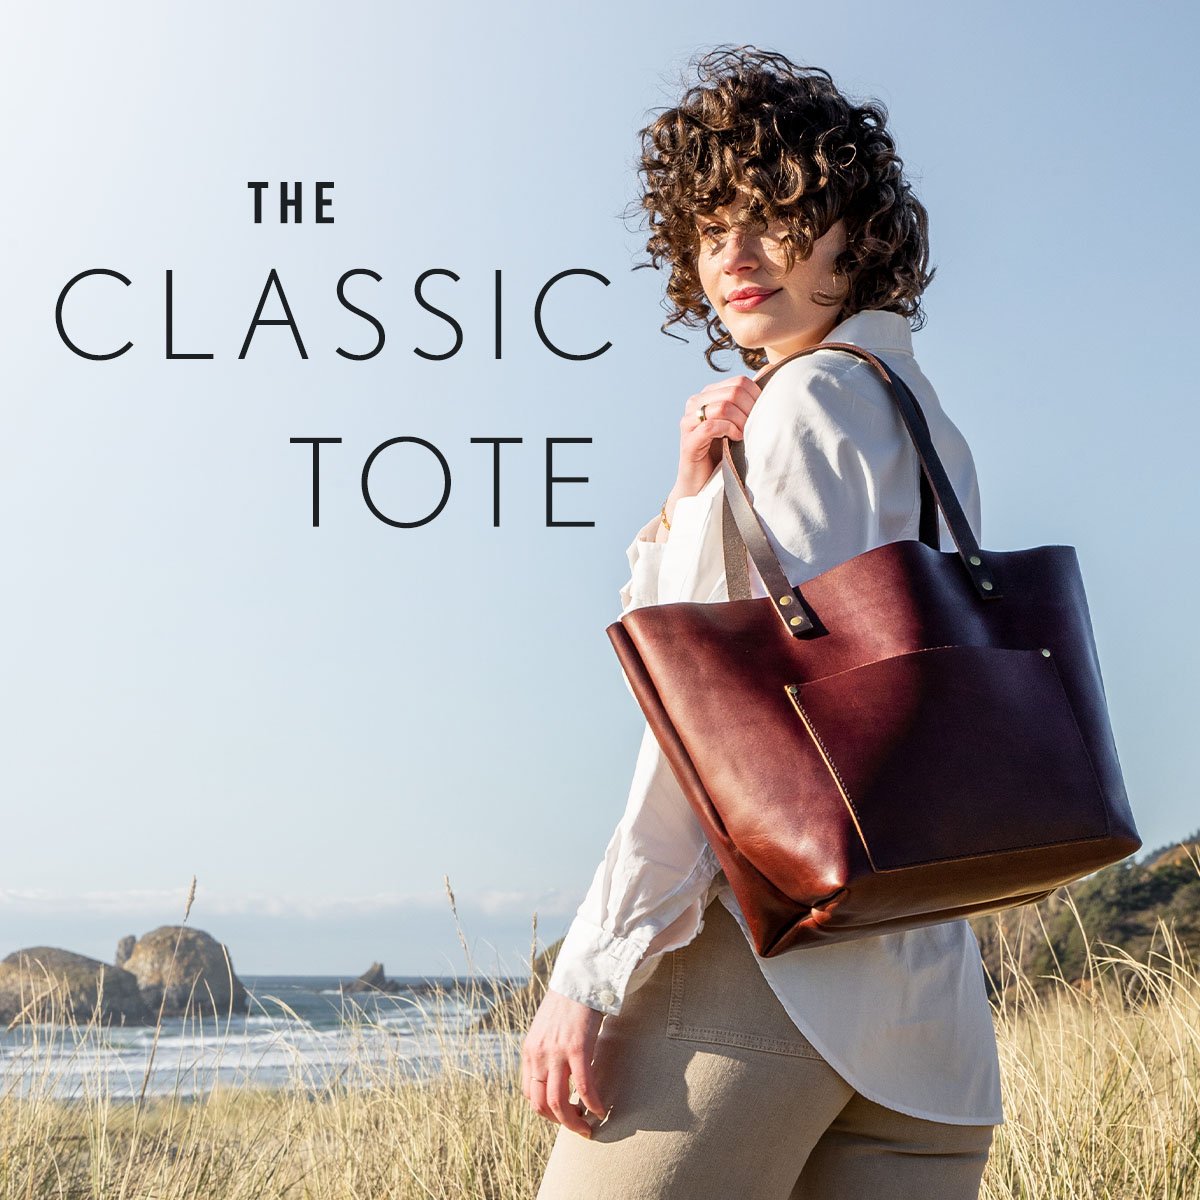 HomepageTile_ClassicTote_March2022_MZ.jpg